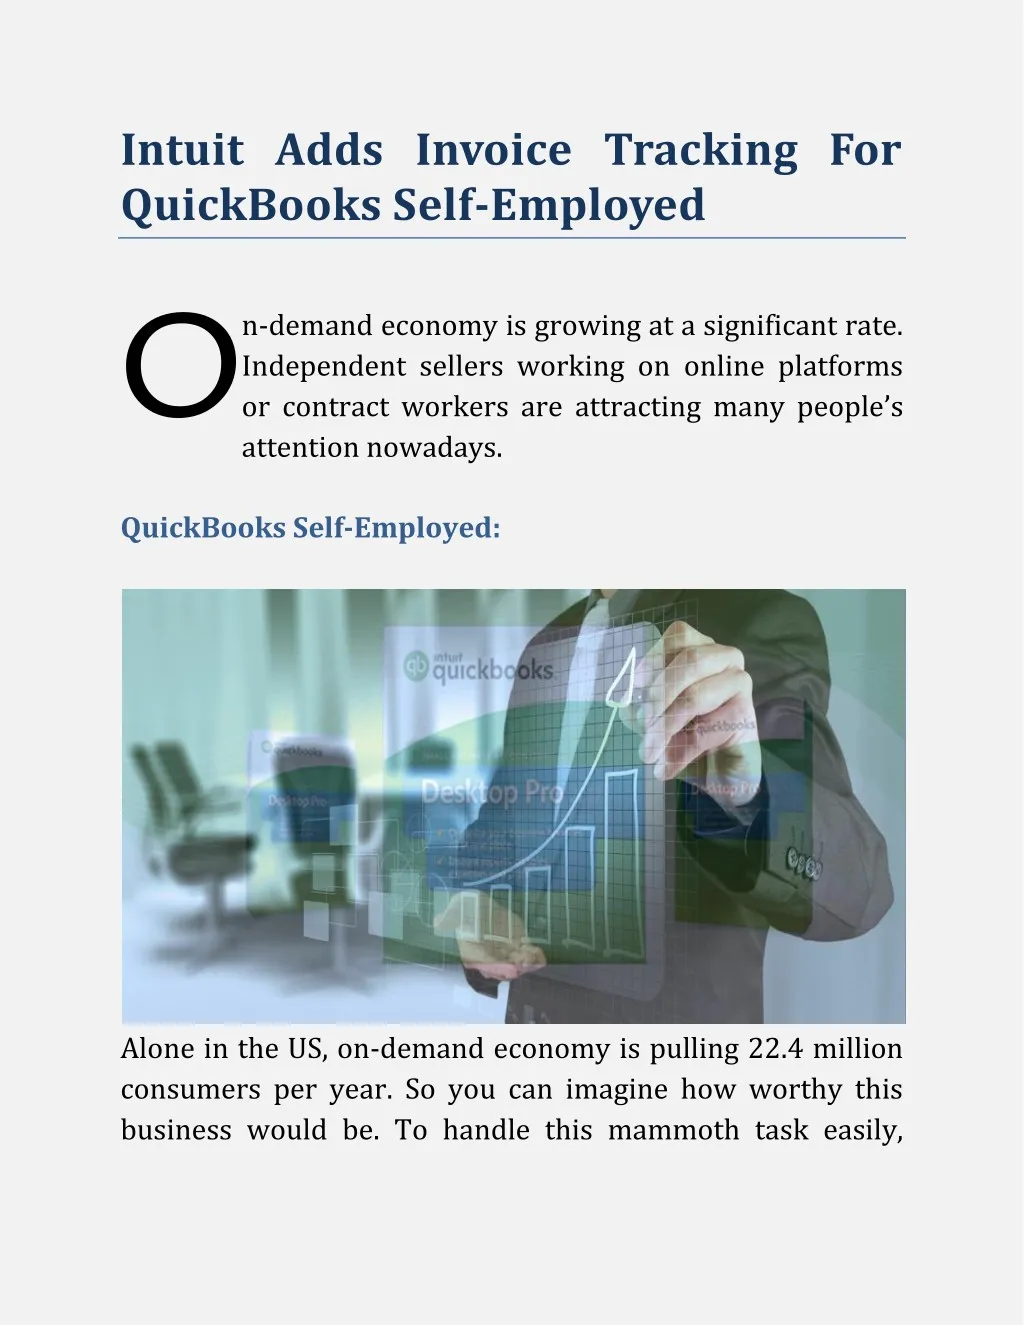 intuit adds invoice tracking for quickbooks self